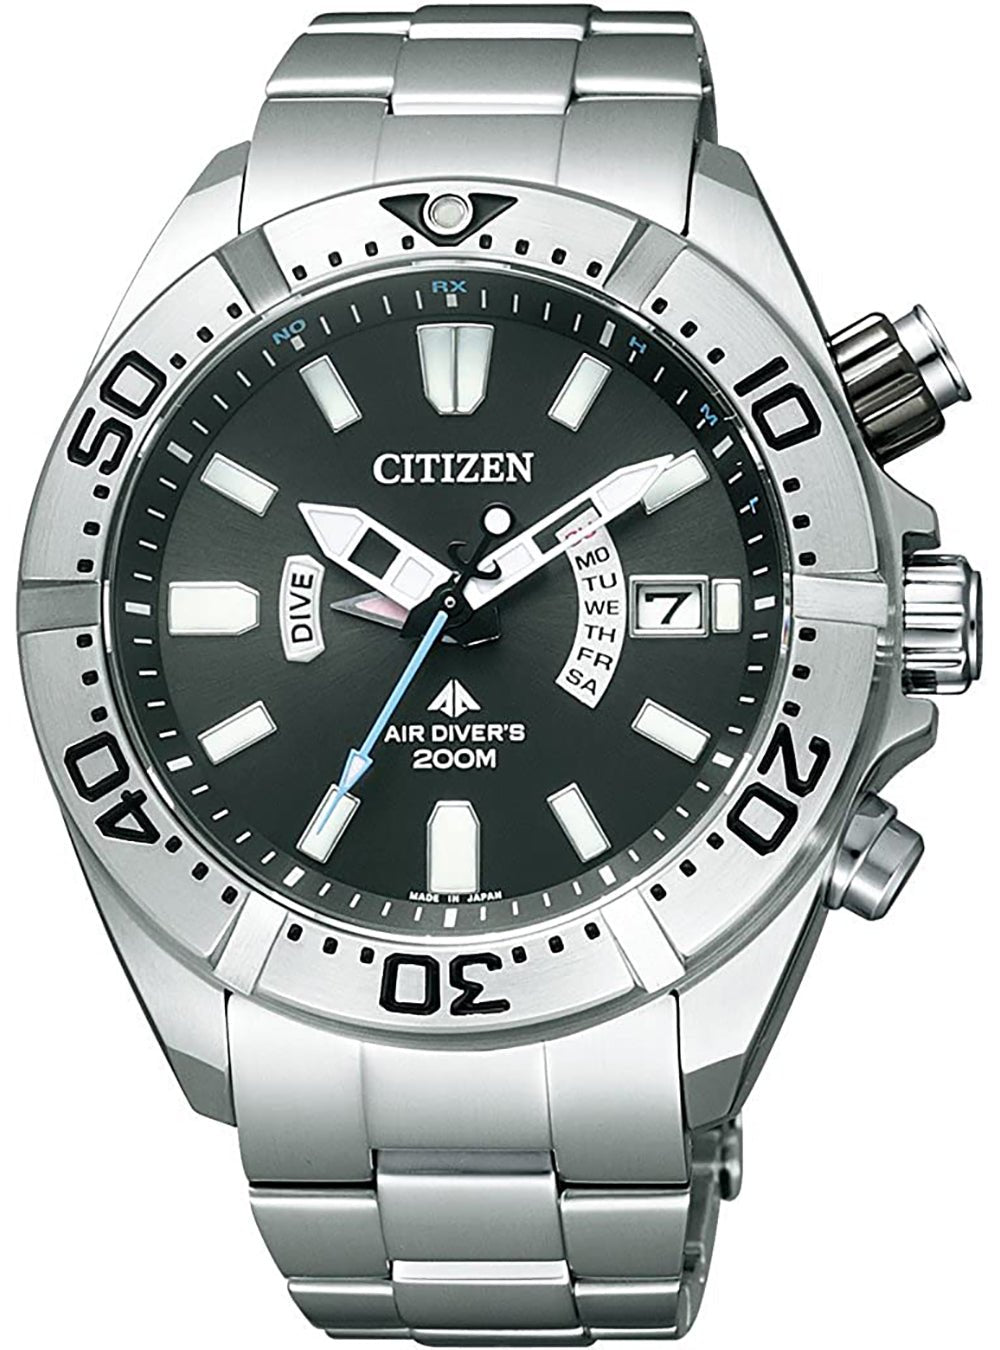 CITIZEN PROMASTER PMD56-3081 Eco-Drive Made in Japan JDM